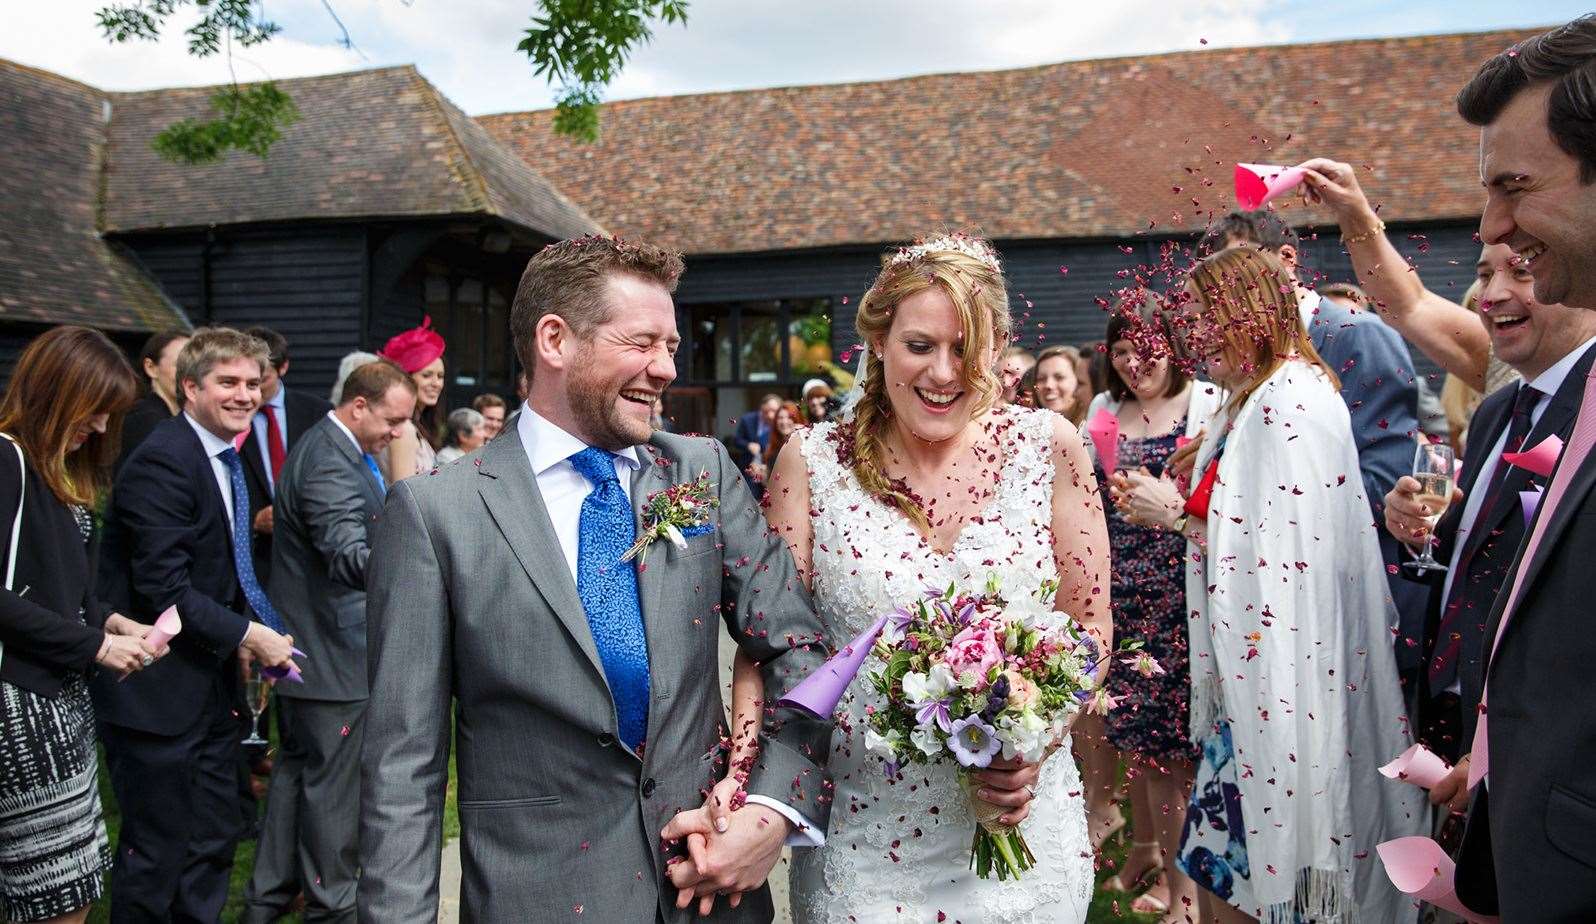 David Jackson: "Finding the perfect venue is absolutely crucial and for those seeking something beautiful, picturesque of a perfect wedding and natural, then the countryside is the ideal option."